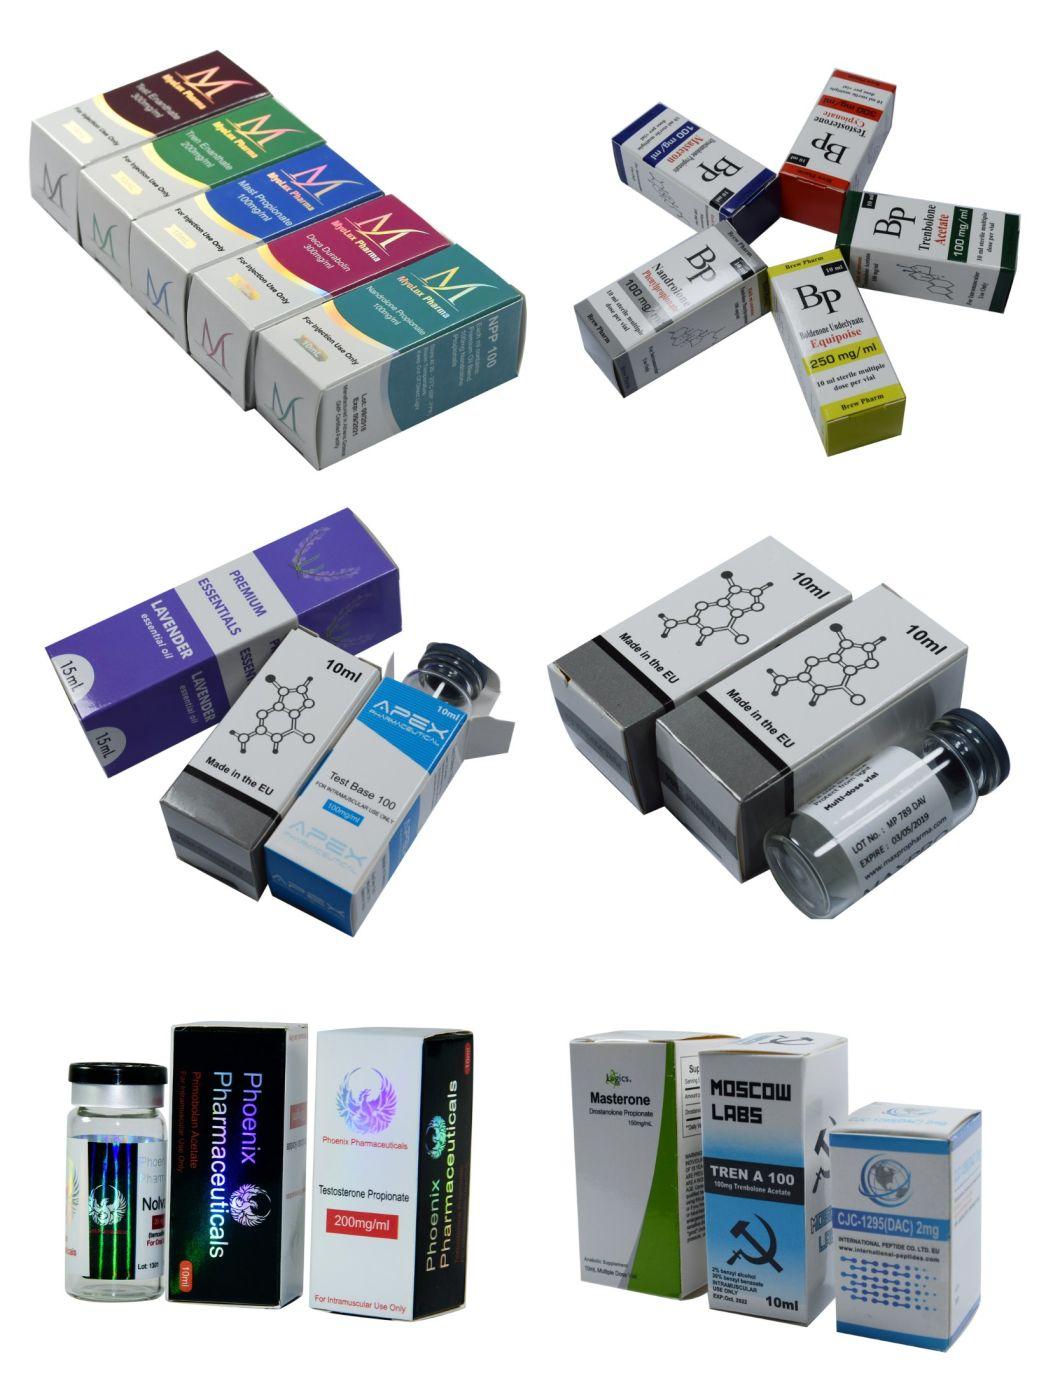 Customized 10ml Anabolic Injection Vial Box Packaging Holographic Laser Paper Boxes for 10ml Vial